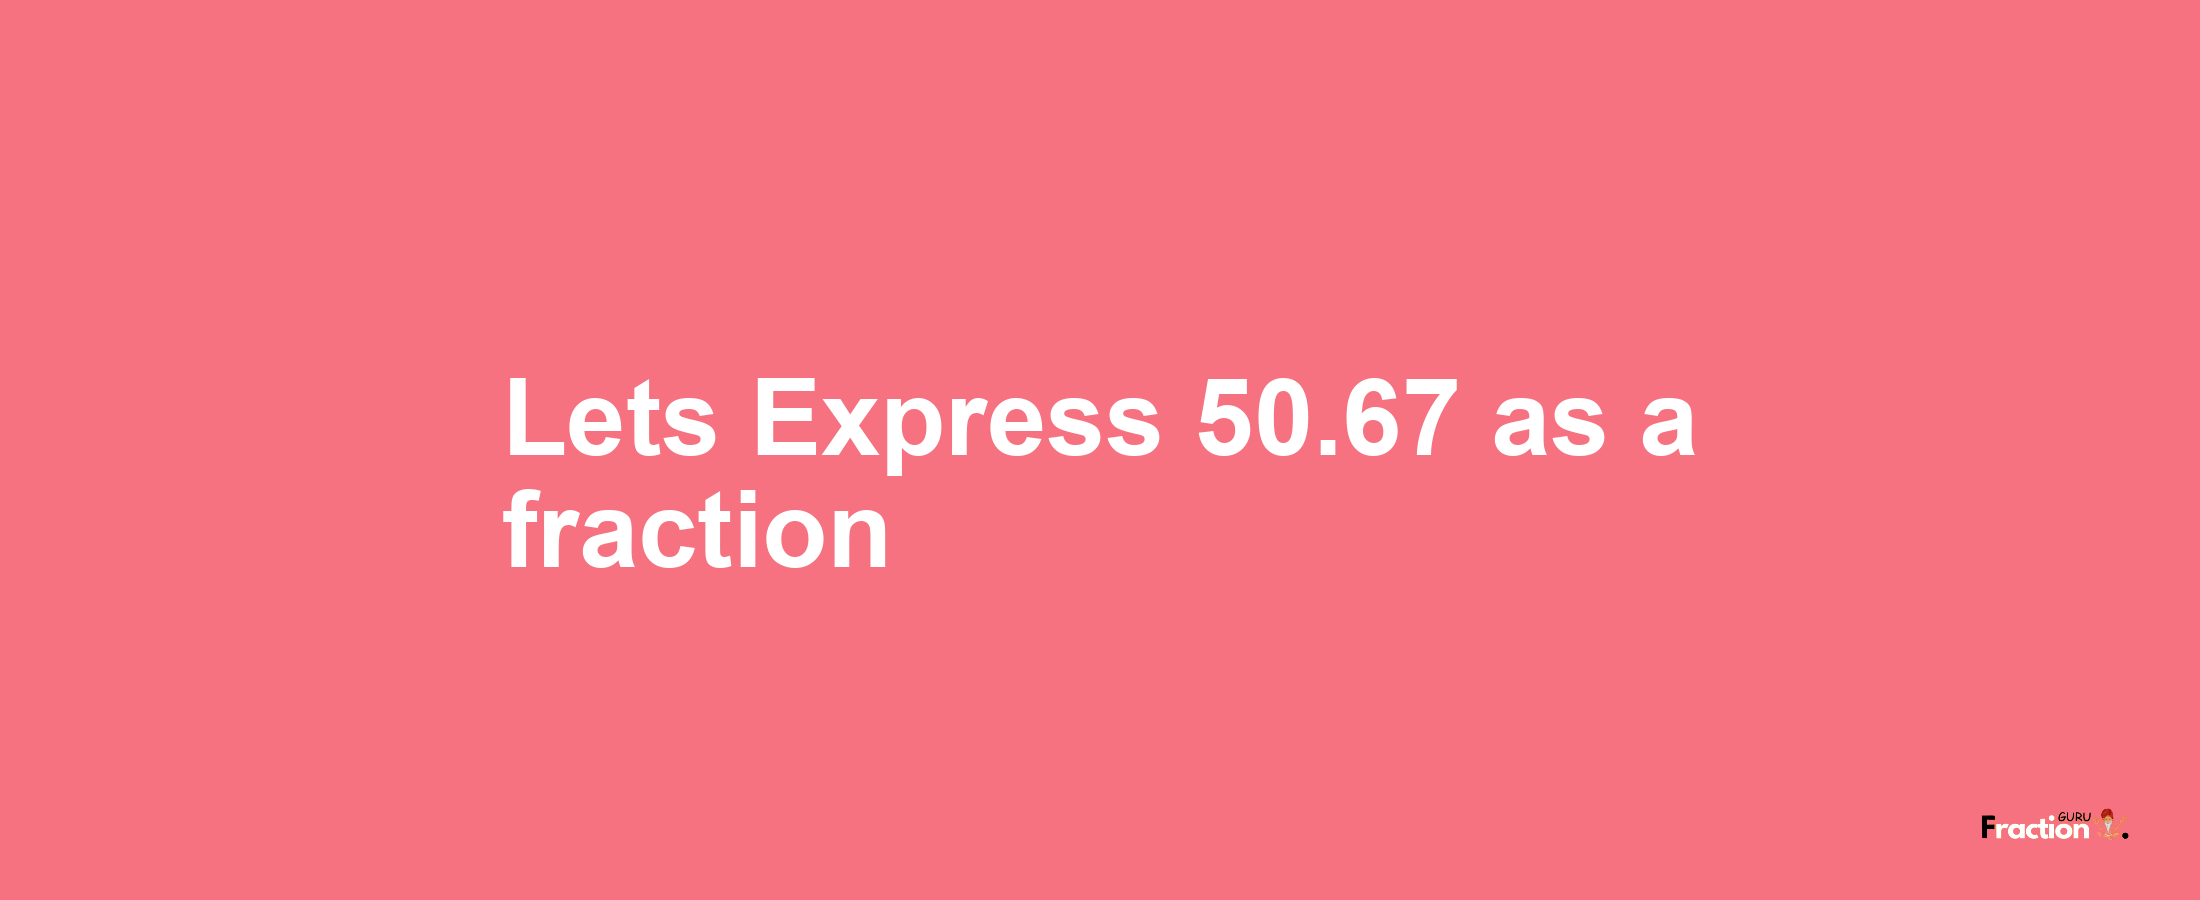 Lets Express 50.67 as afraction